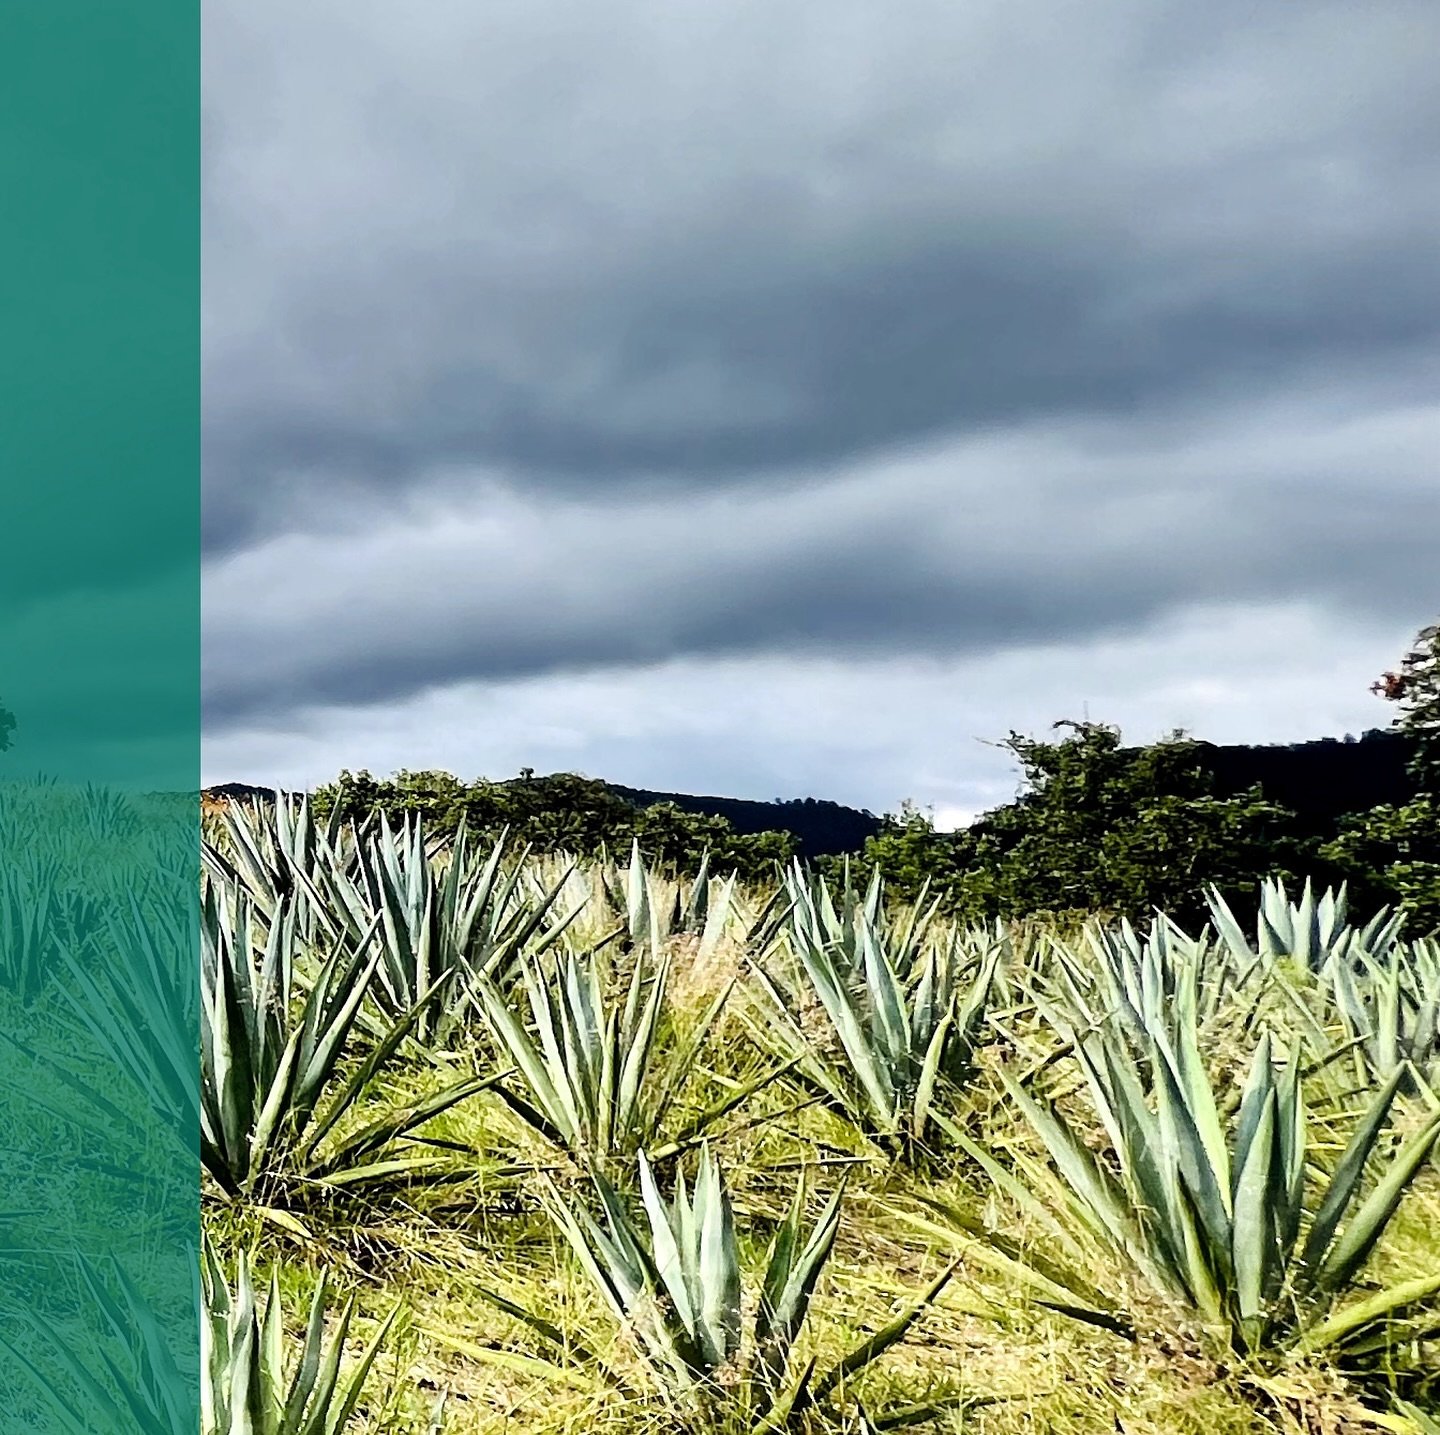 In January 2024 Creador reached a milestone, one set during the formation of the project - to be able to pay a portion of revenue to the producers.

Read more: https://www.creadorspirits.com/blog

#destiladodeagave
#agavespirits
#palenque
#claypotfer